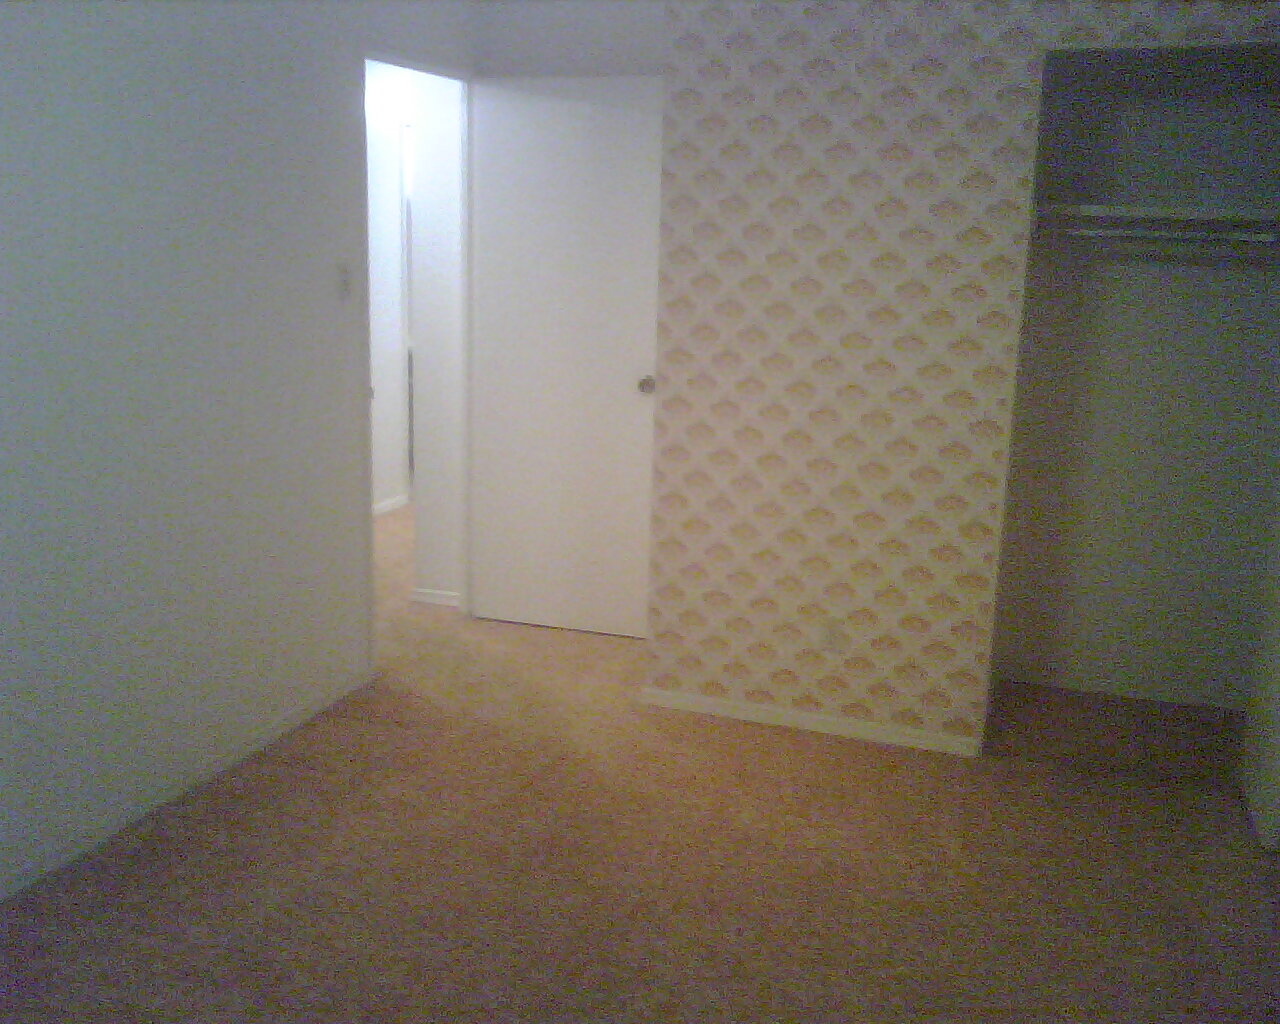 Upstairs (2nd Floor) bedroom 2's front end as seen from the room's corner